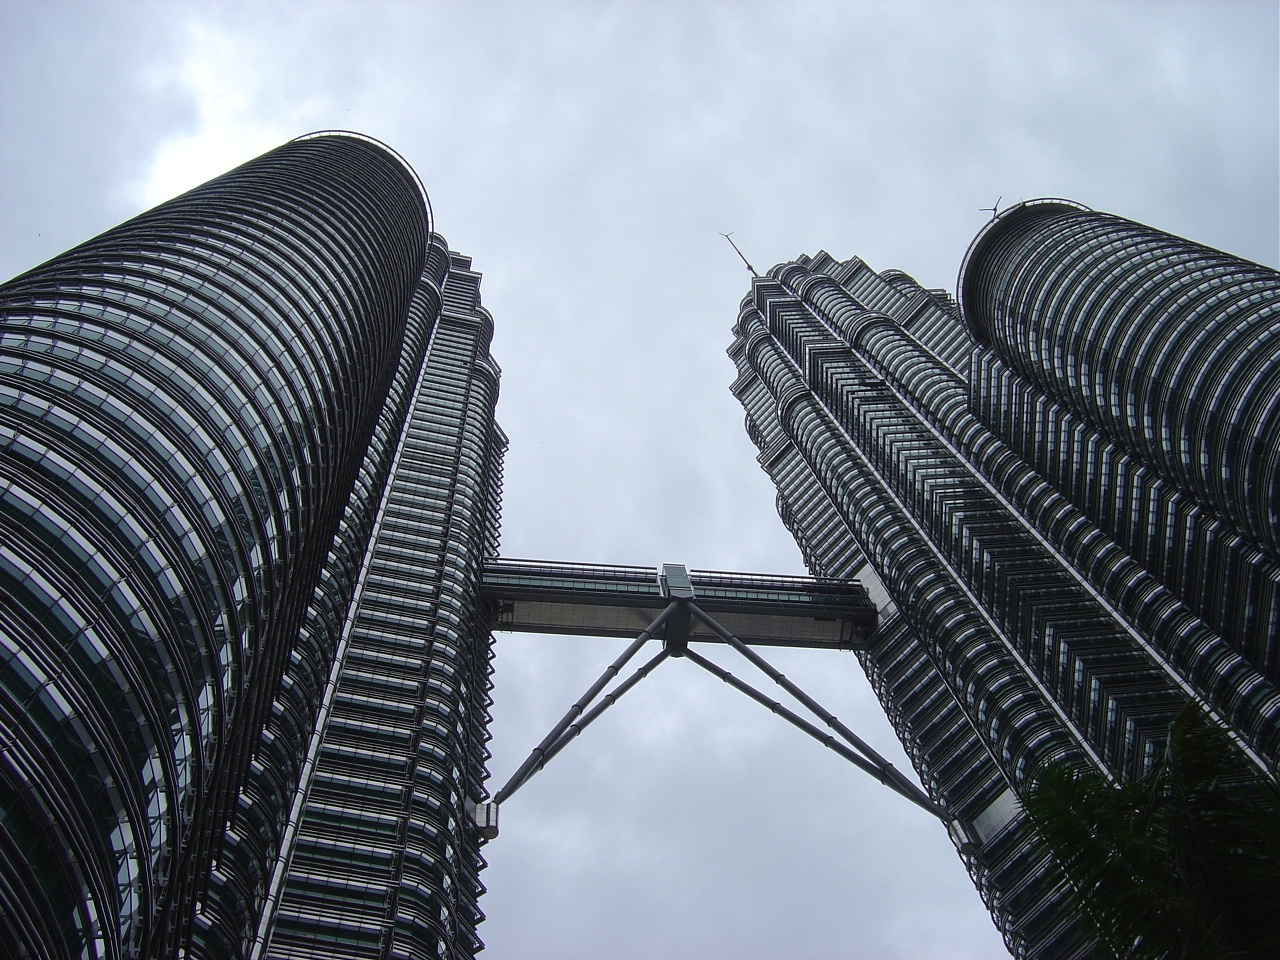 A worms eye view of the towers Kuala Lumpur